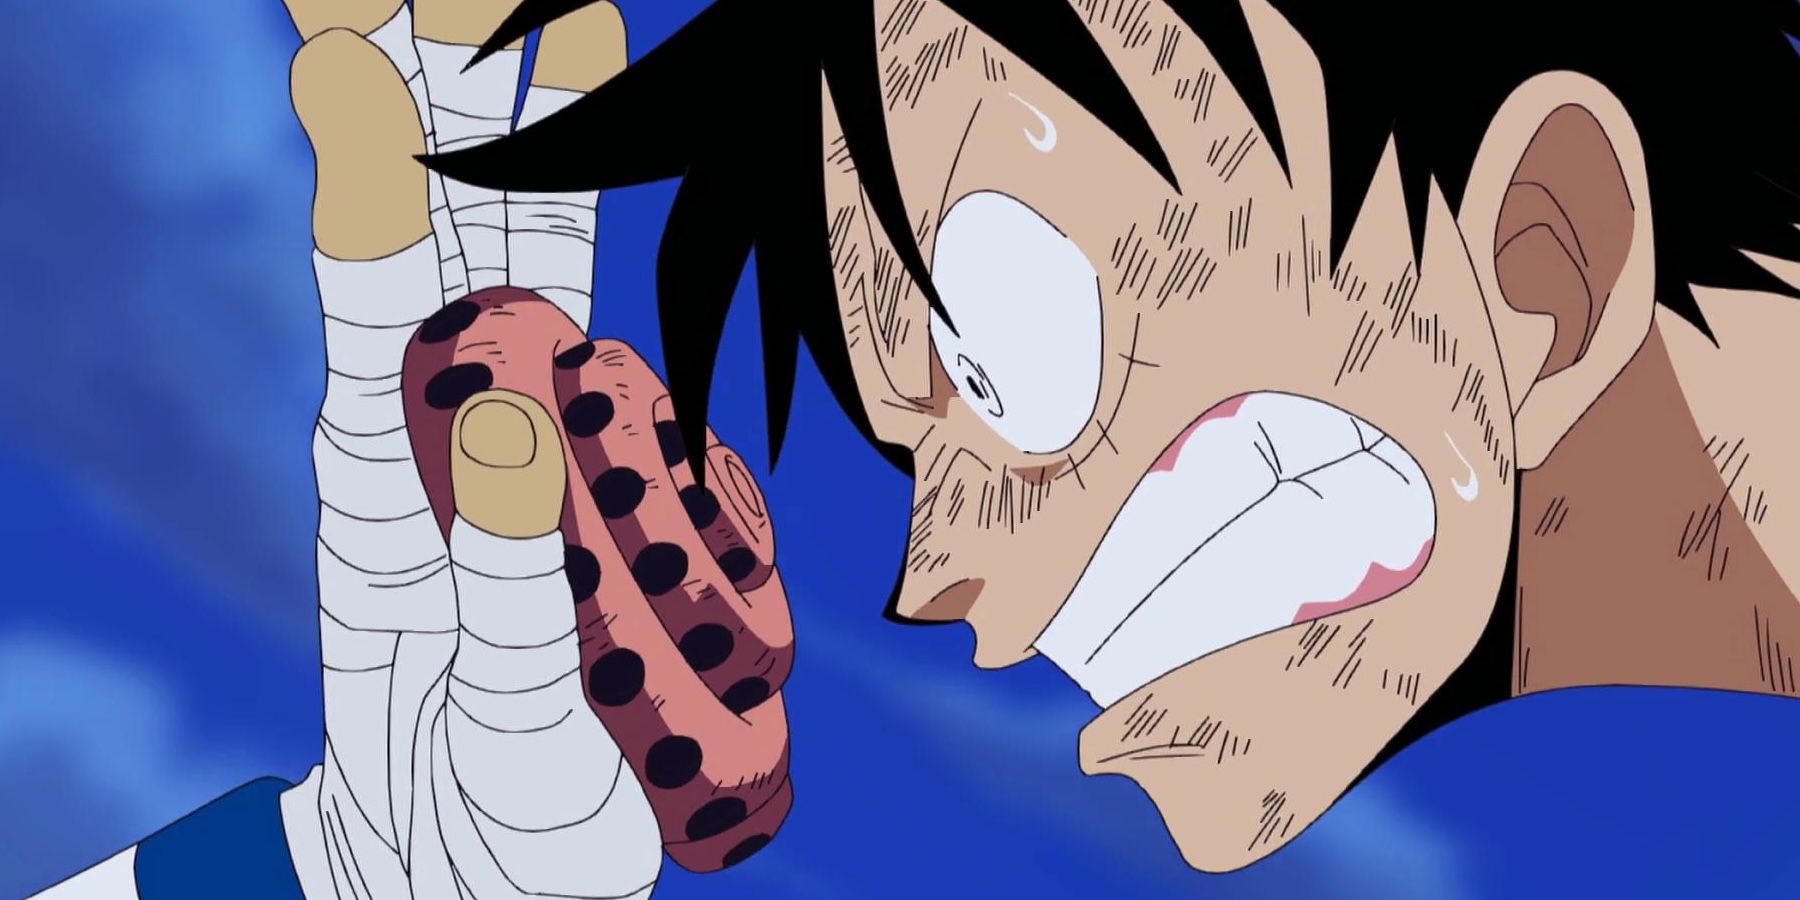 Luffy looks angrily at Usopp's hand weapon